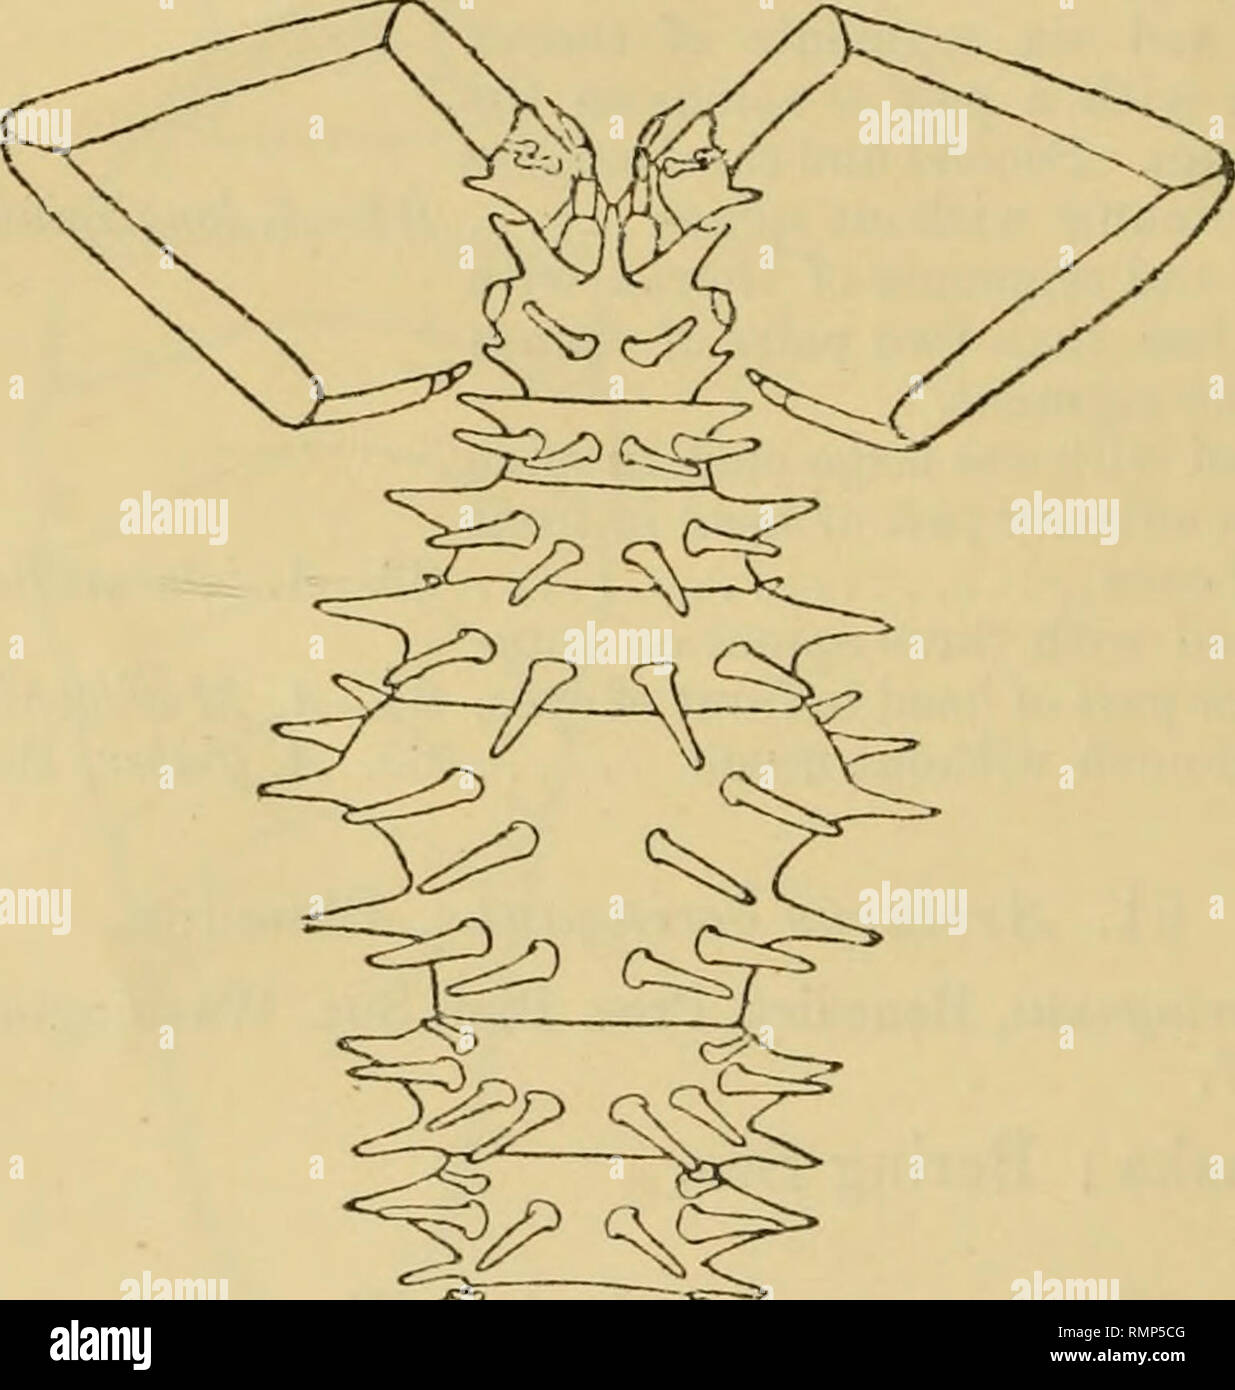 . The Annals and magazine of natural history; zoology, botany, and geology. Natural history; Zoology; Botany; Geology. 276 Miss H. Richardson on the Isopods of the to tlie end of the second joint of the second pair of antennae. The first joint of the second pair of antennae is visible and unarmed; the second joint is armed with three spines ; the tliiid joint is unarmed and is about twice as long aa the second joint; the fourth and fifth joints are about equal in length and are each about twice as long as the third; the flagellum contains three joints. Fig. 28.. Please note that these images a Stock Photo